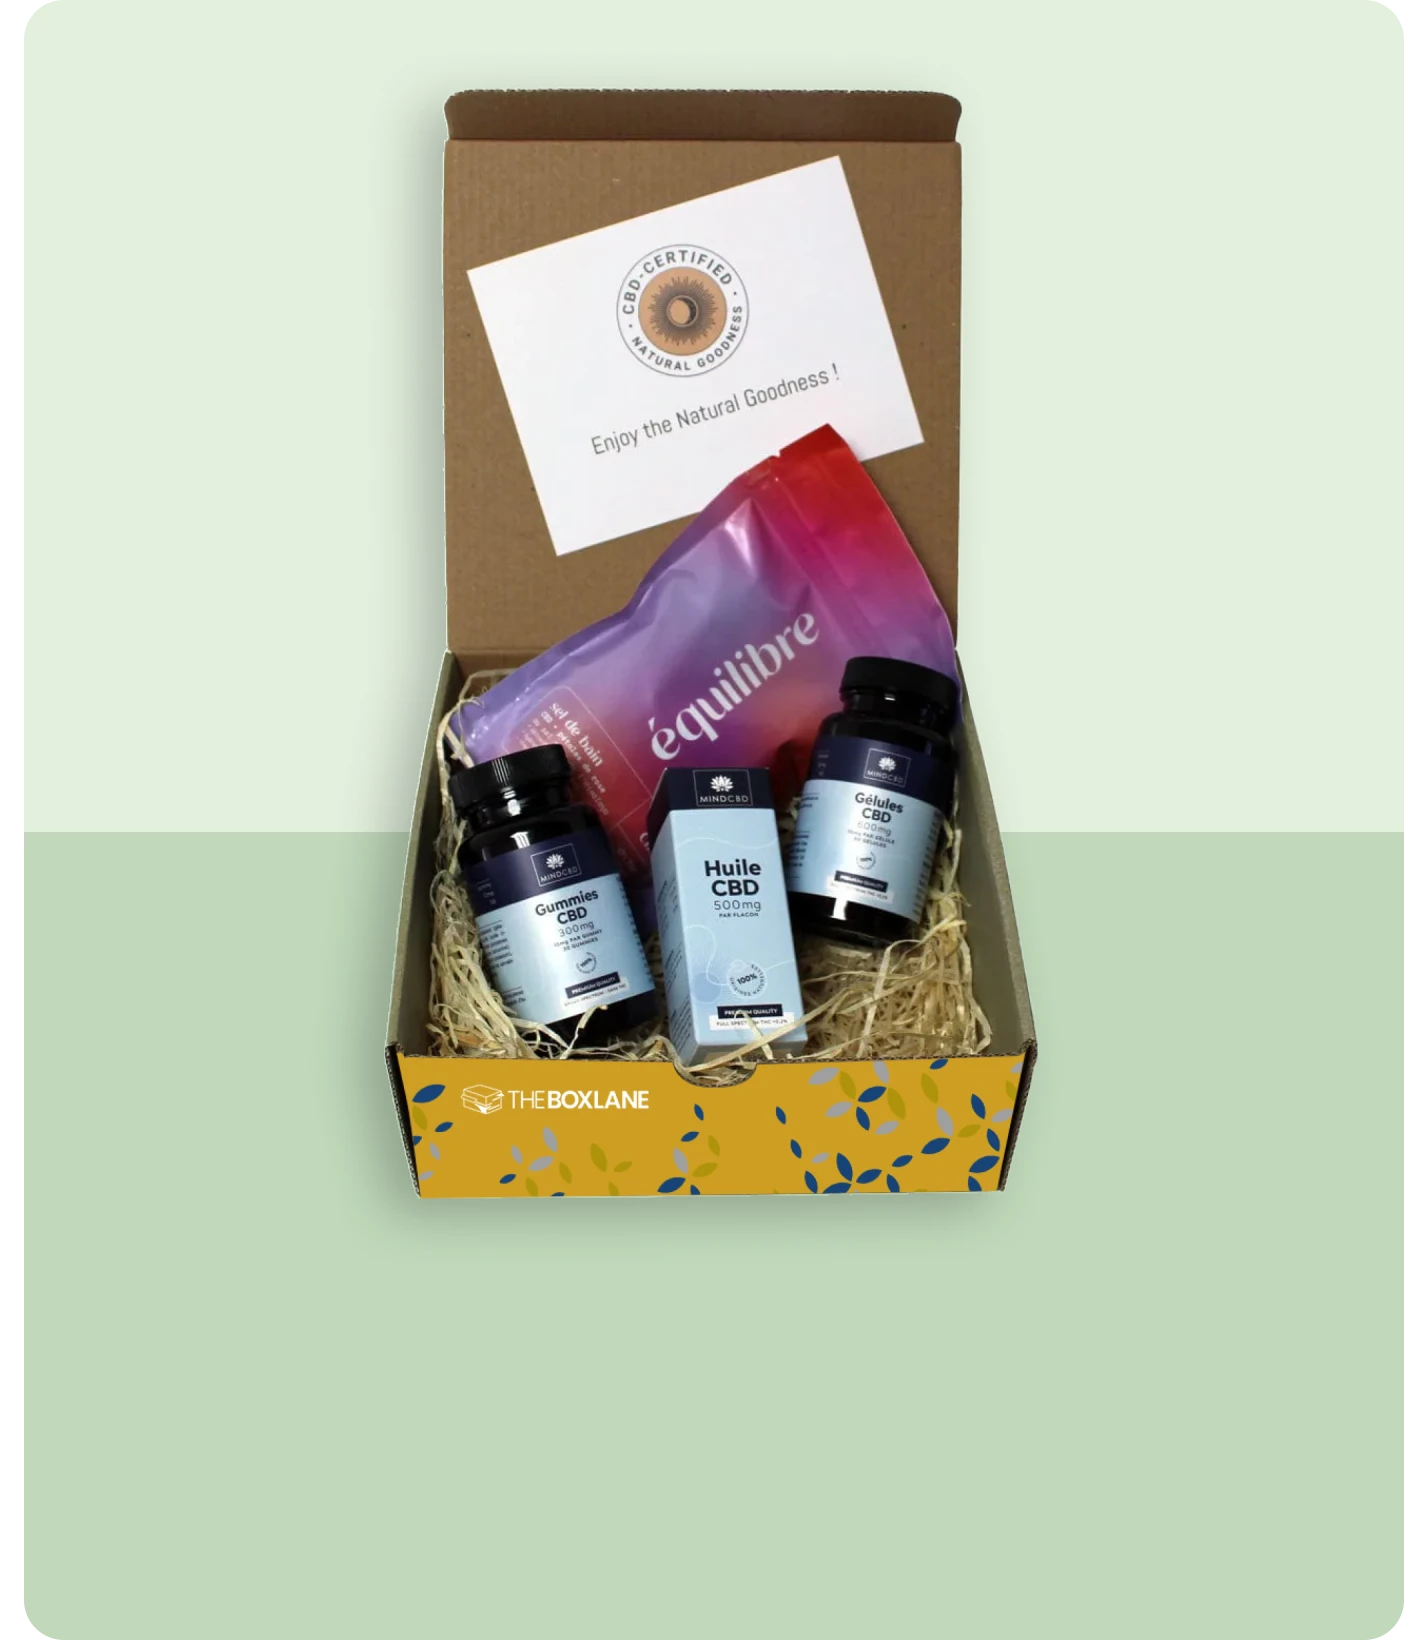 CBD Gift Boxes related products | The Box Lane